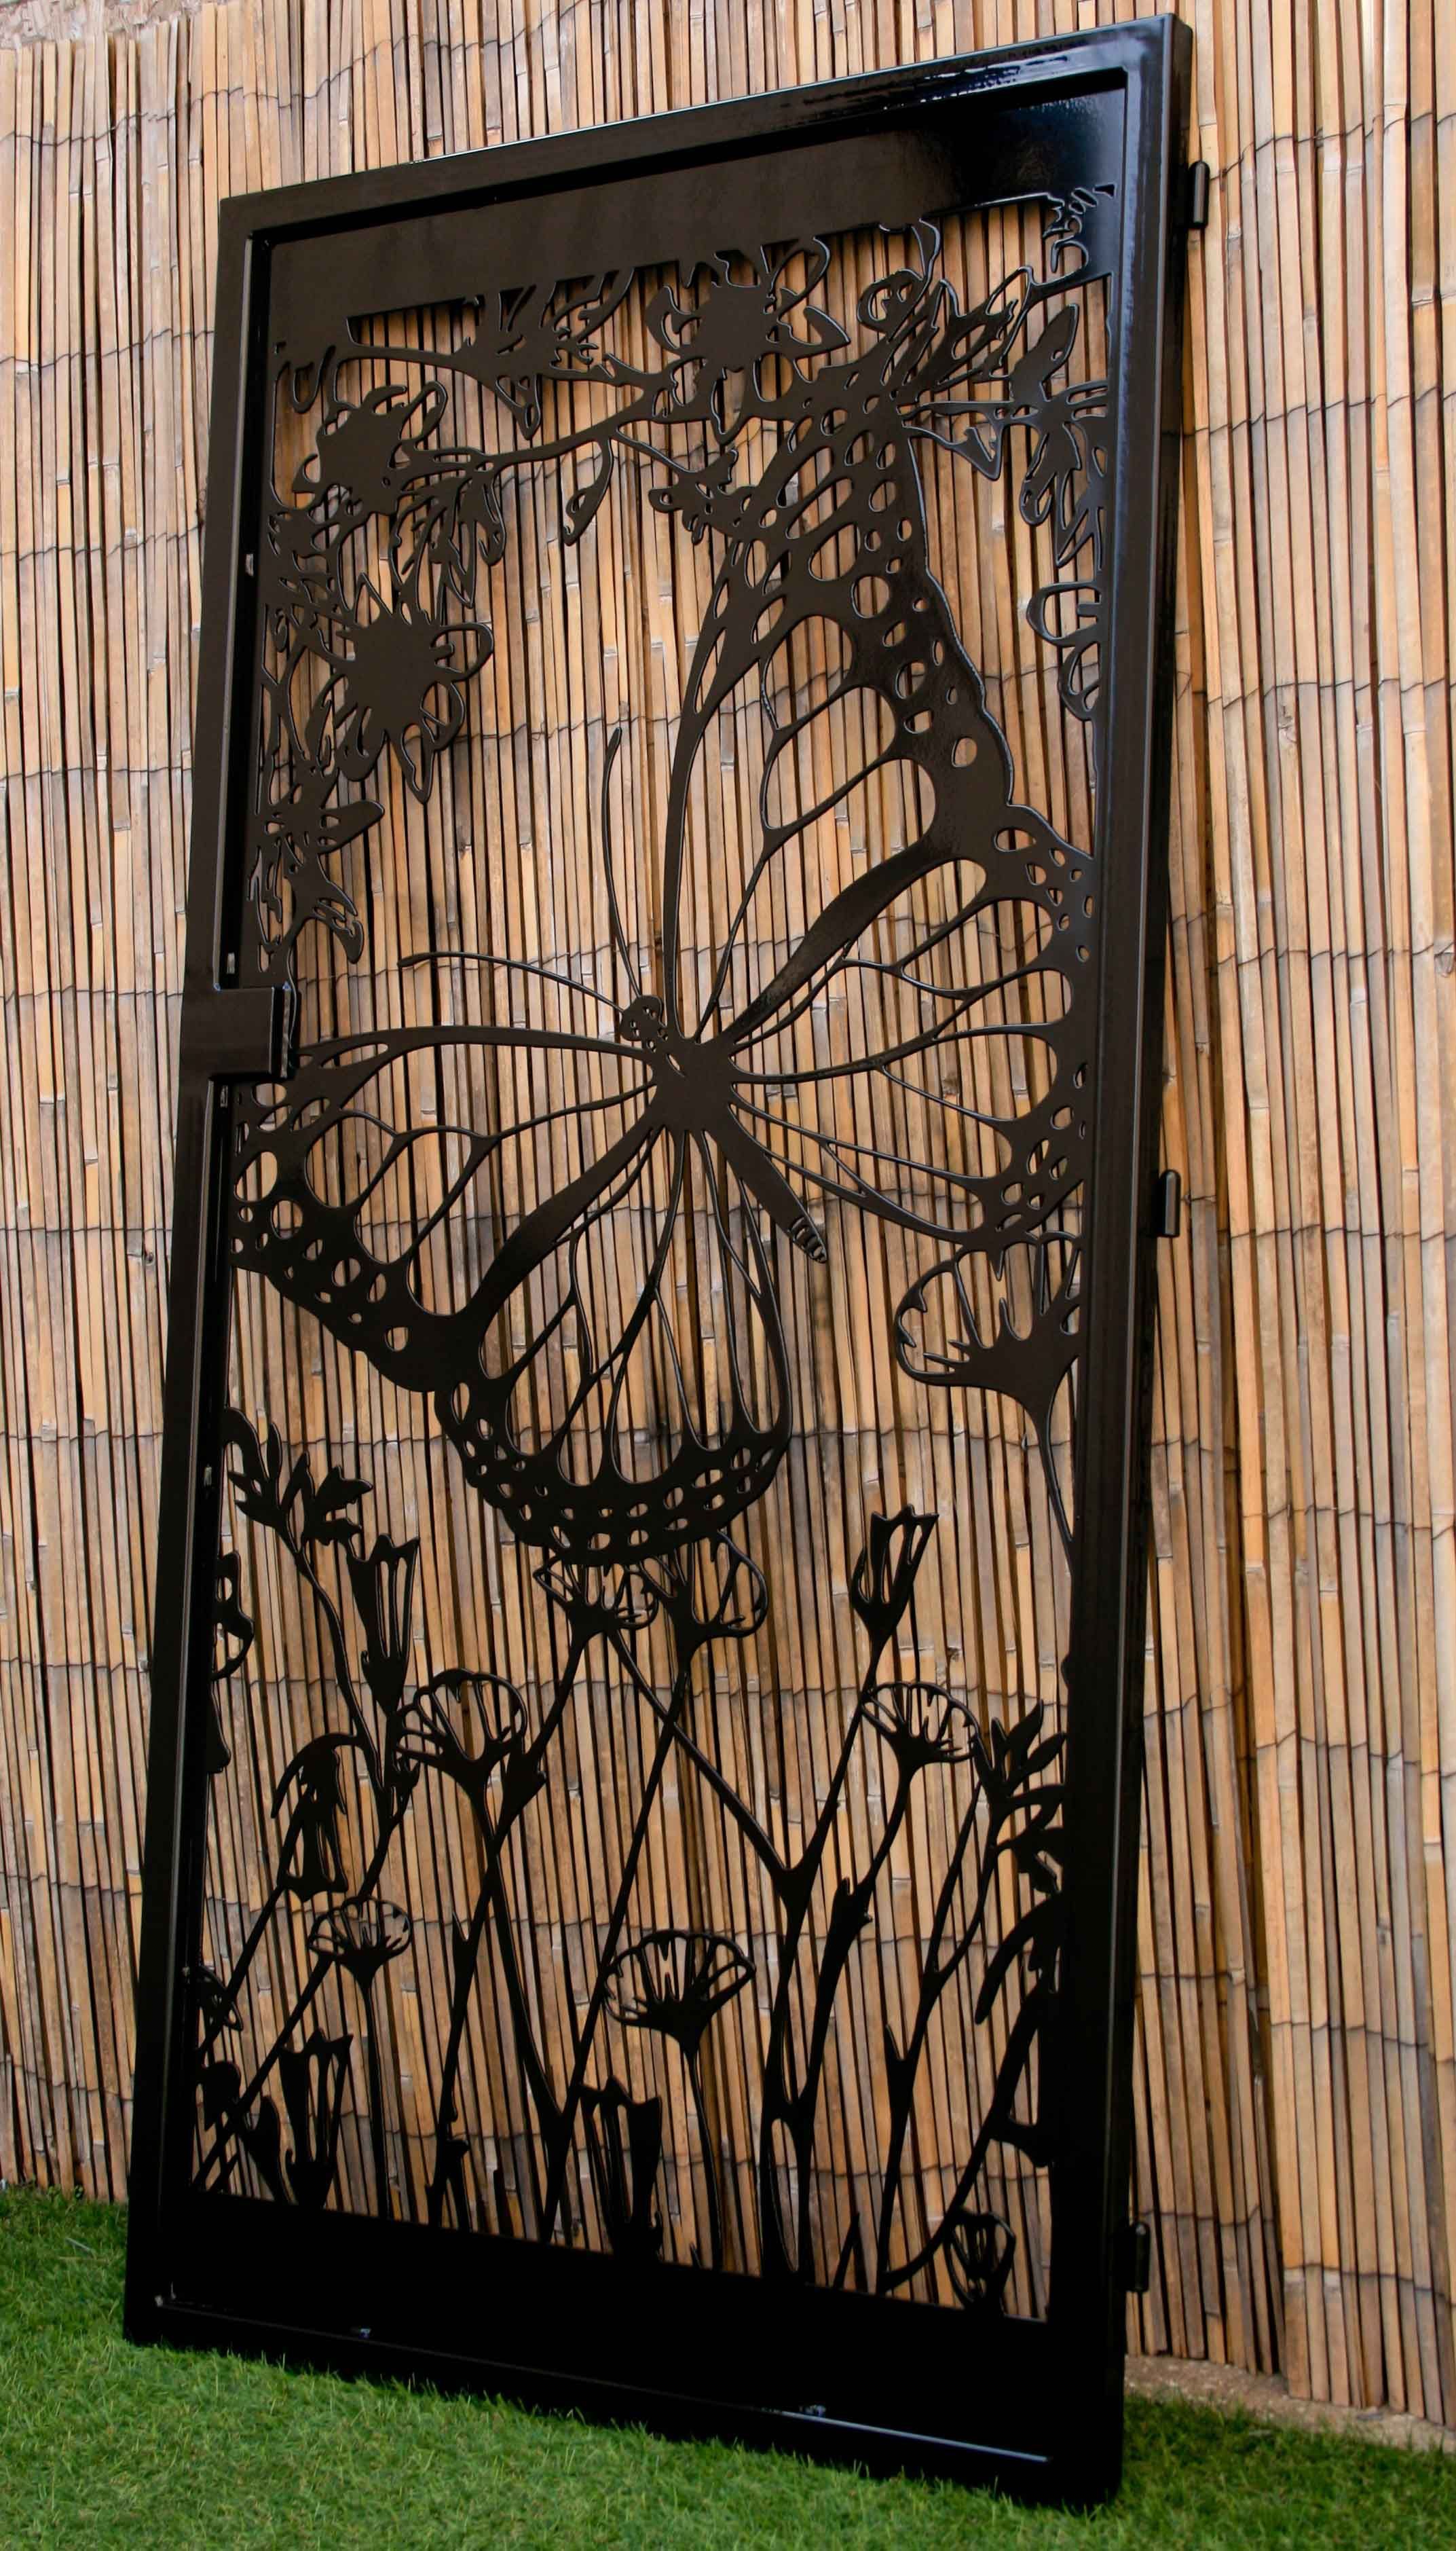 Buy A Hand Crafted Floral Artistic Gate – Butterfly Intended For Flower And Butterfly Urban Design Metal Wall Decor (View 27 of 30)